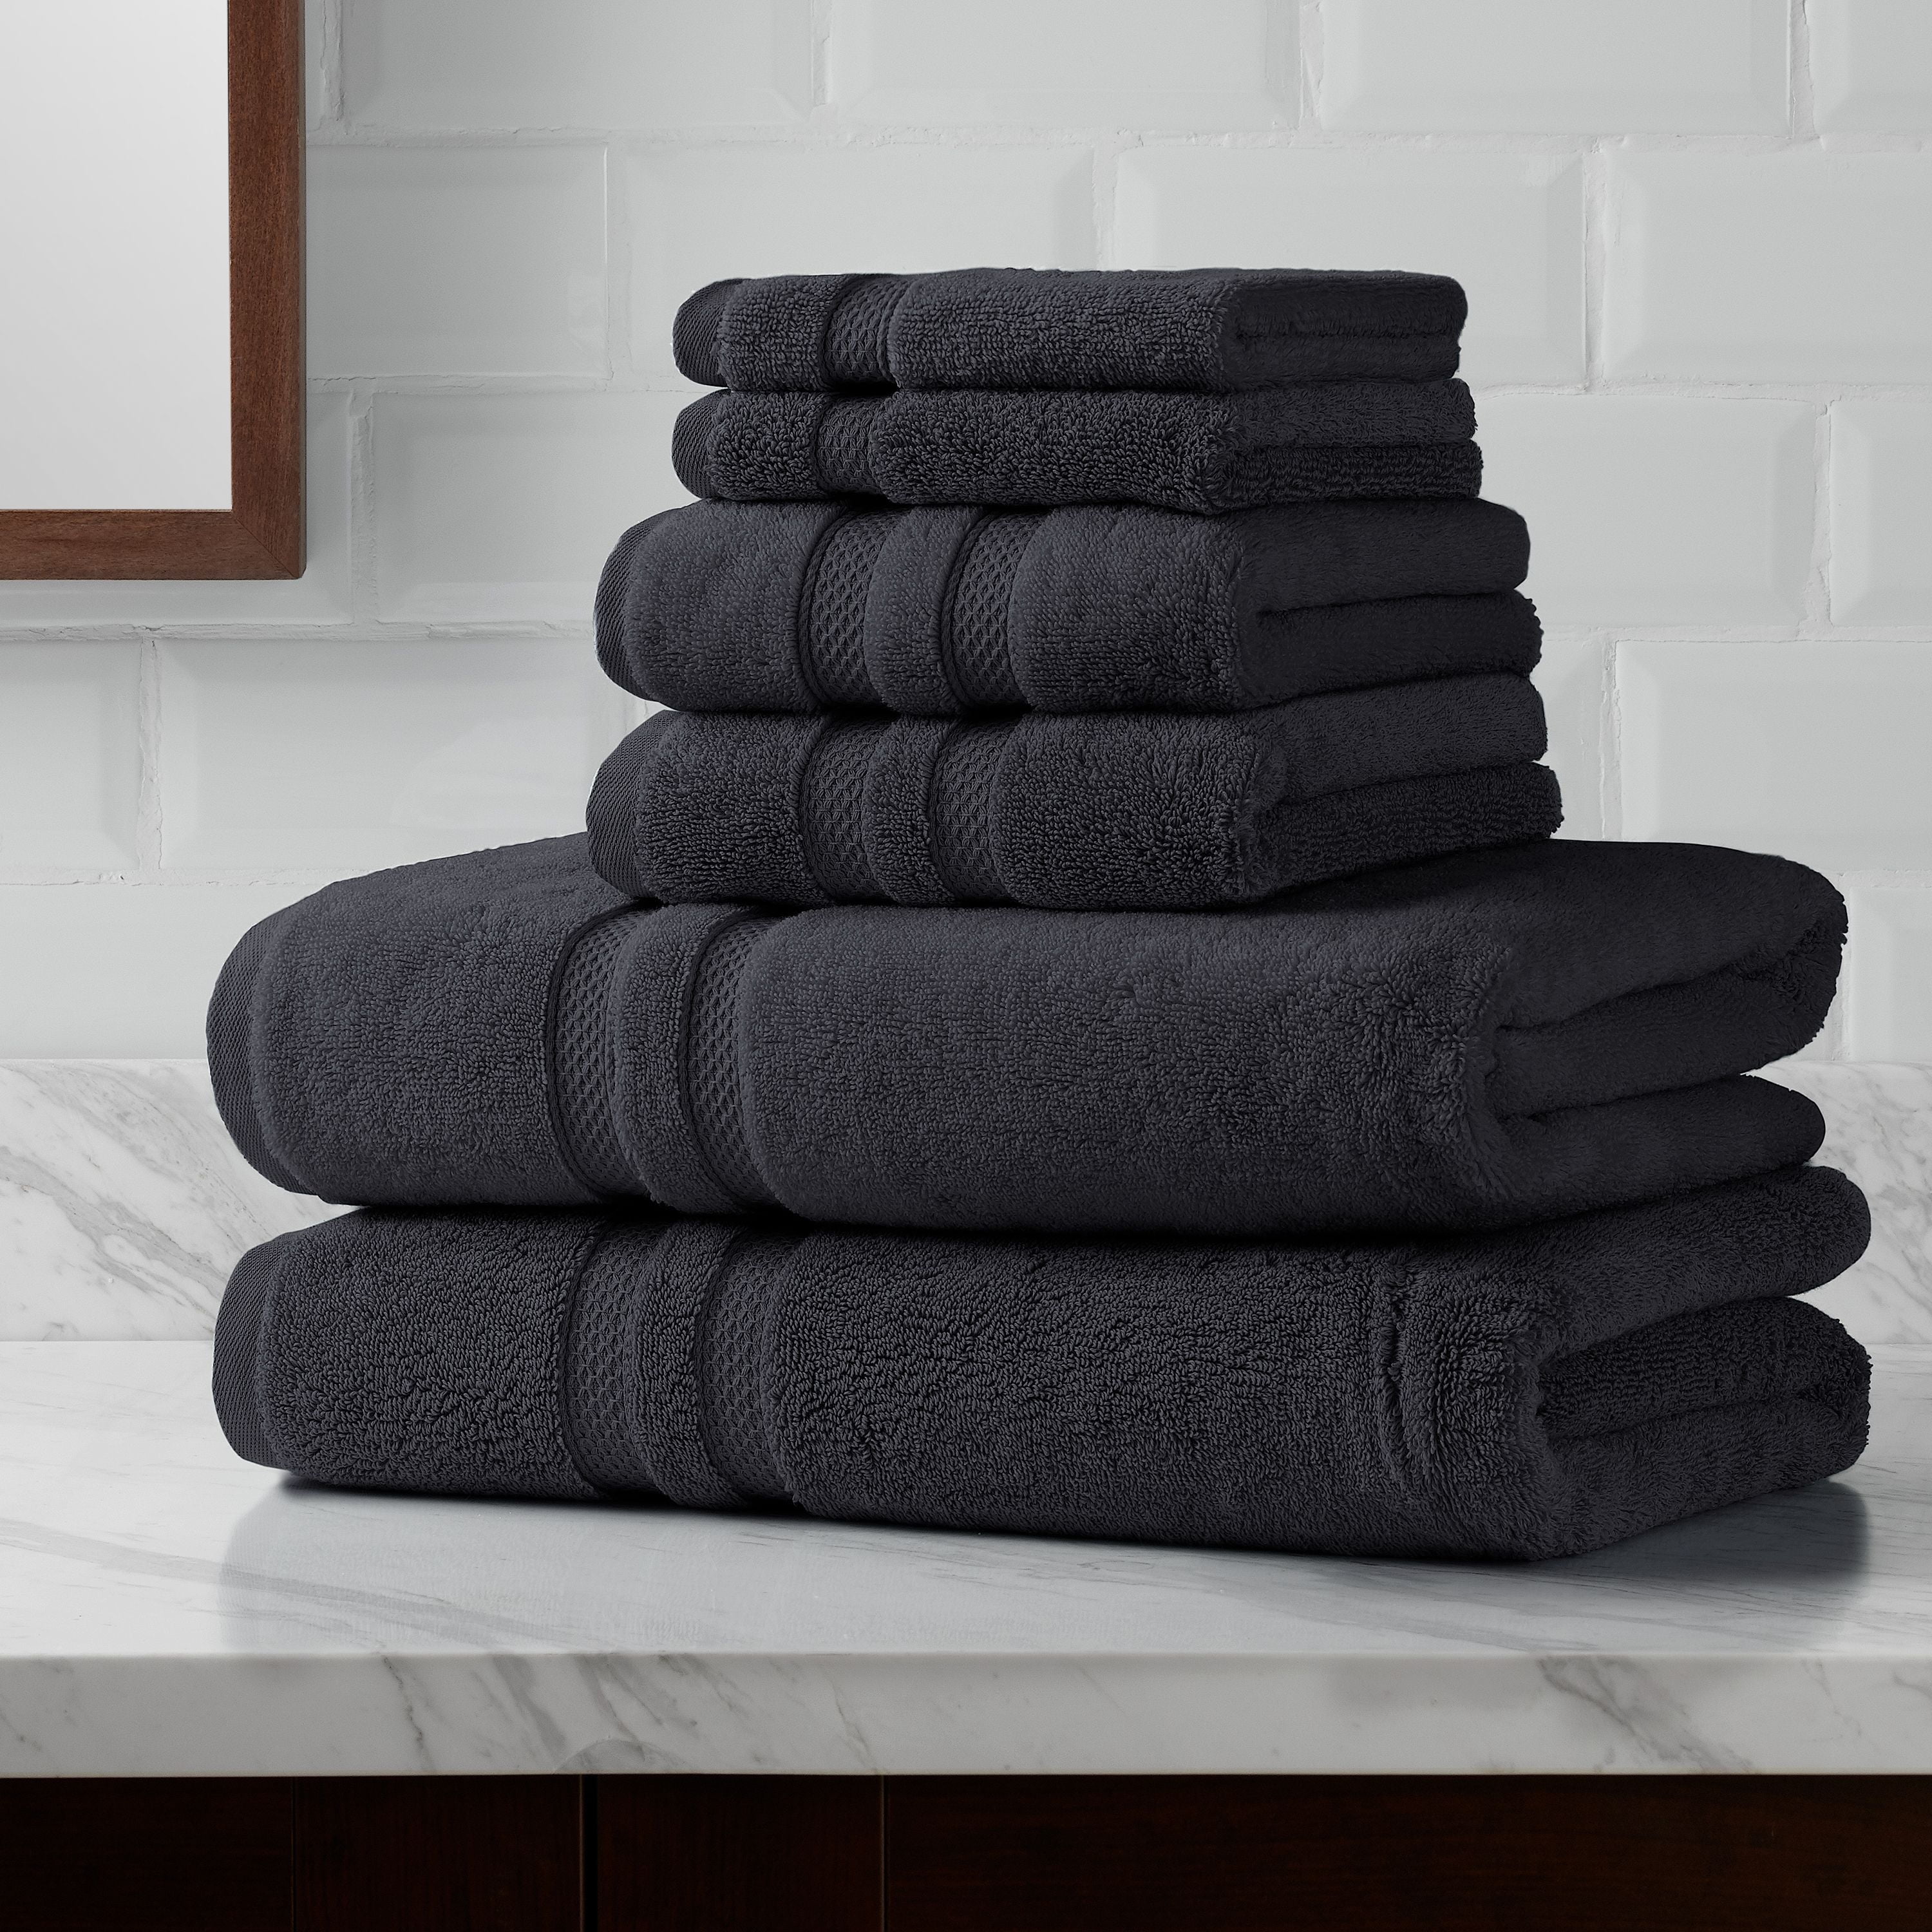 StyleWell HygroCotton Stone Gray 6-Piece Bath Towel Set AT17642_Stone G -  The Home Depot